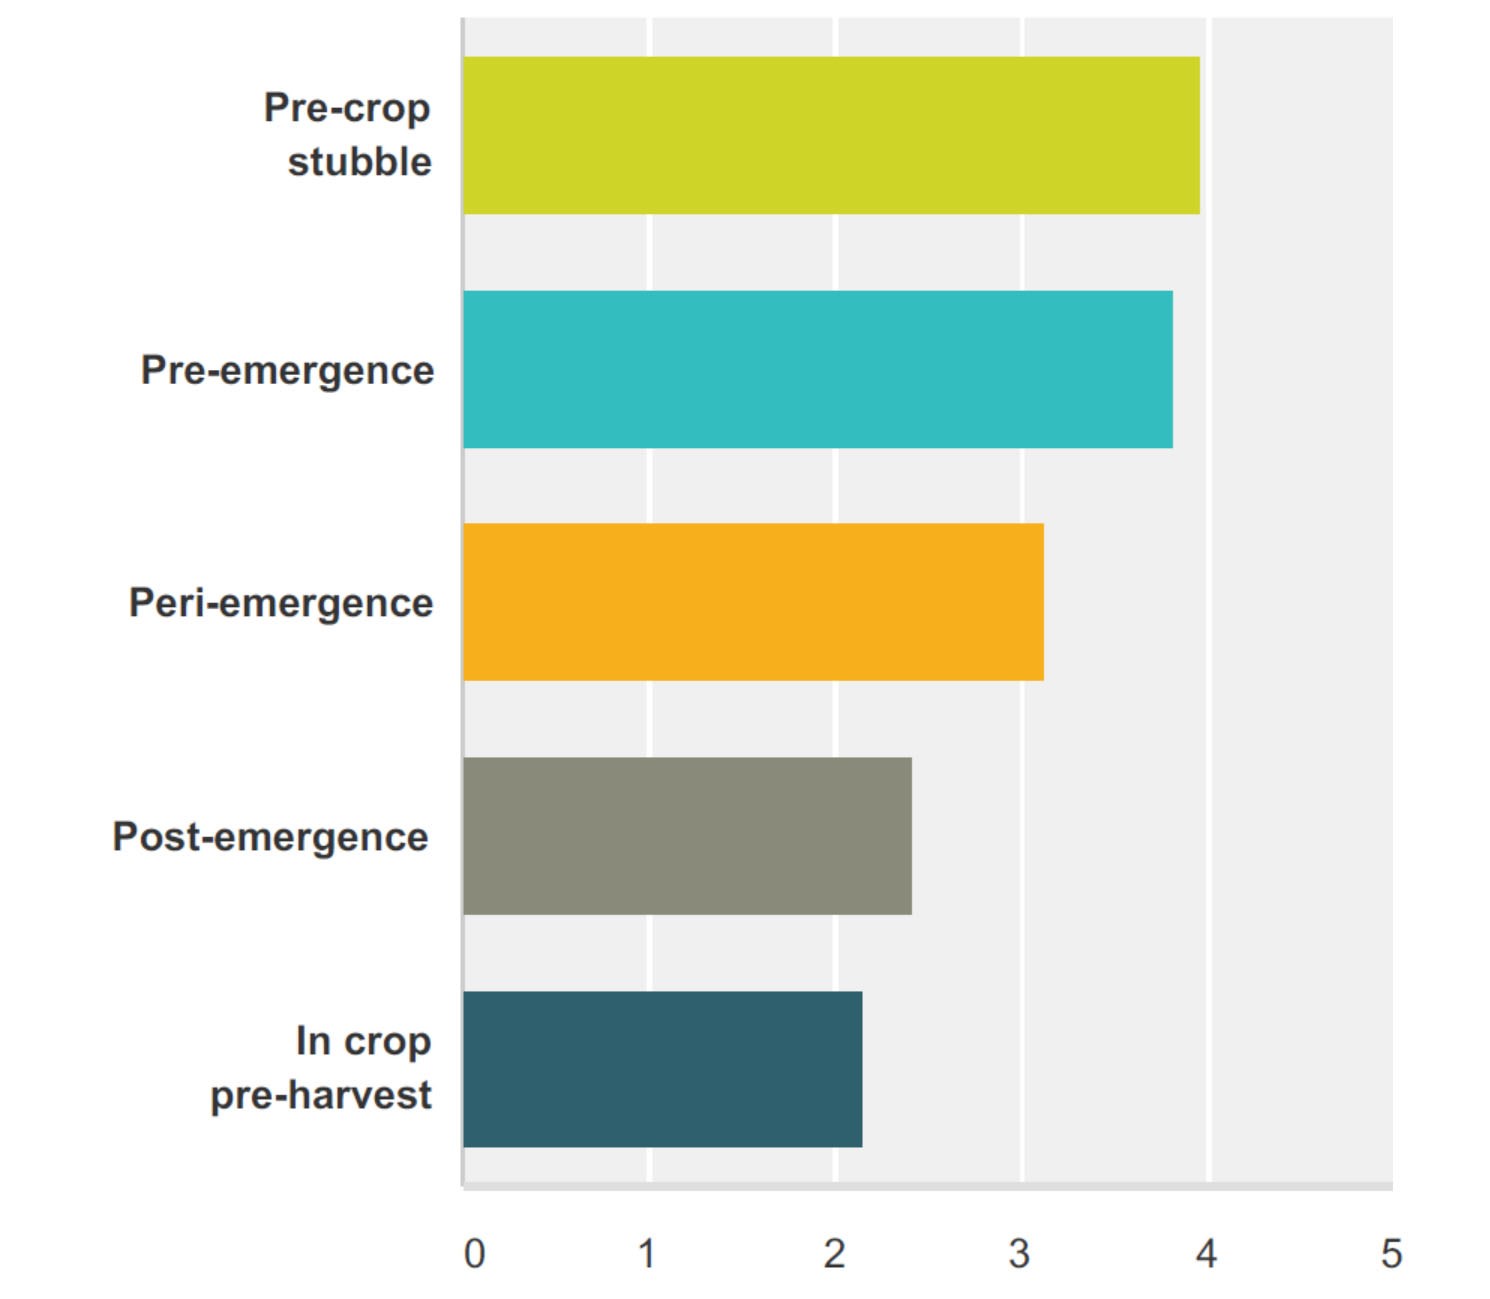 When do you apply your blackgrass herbicides?